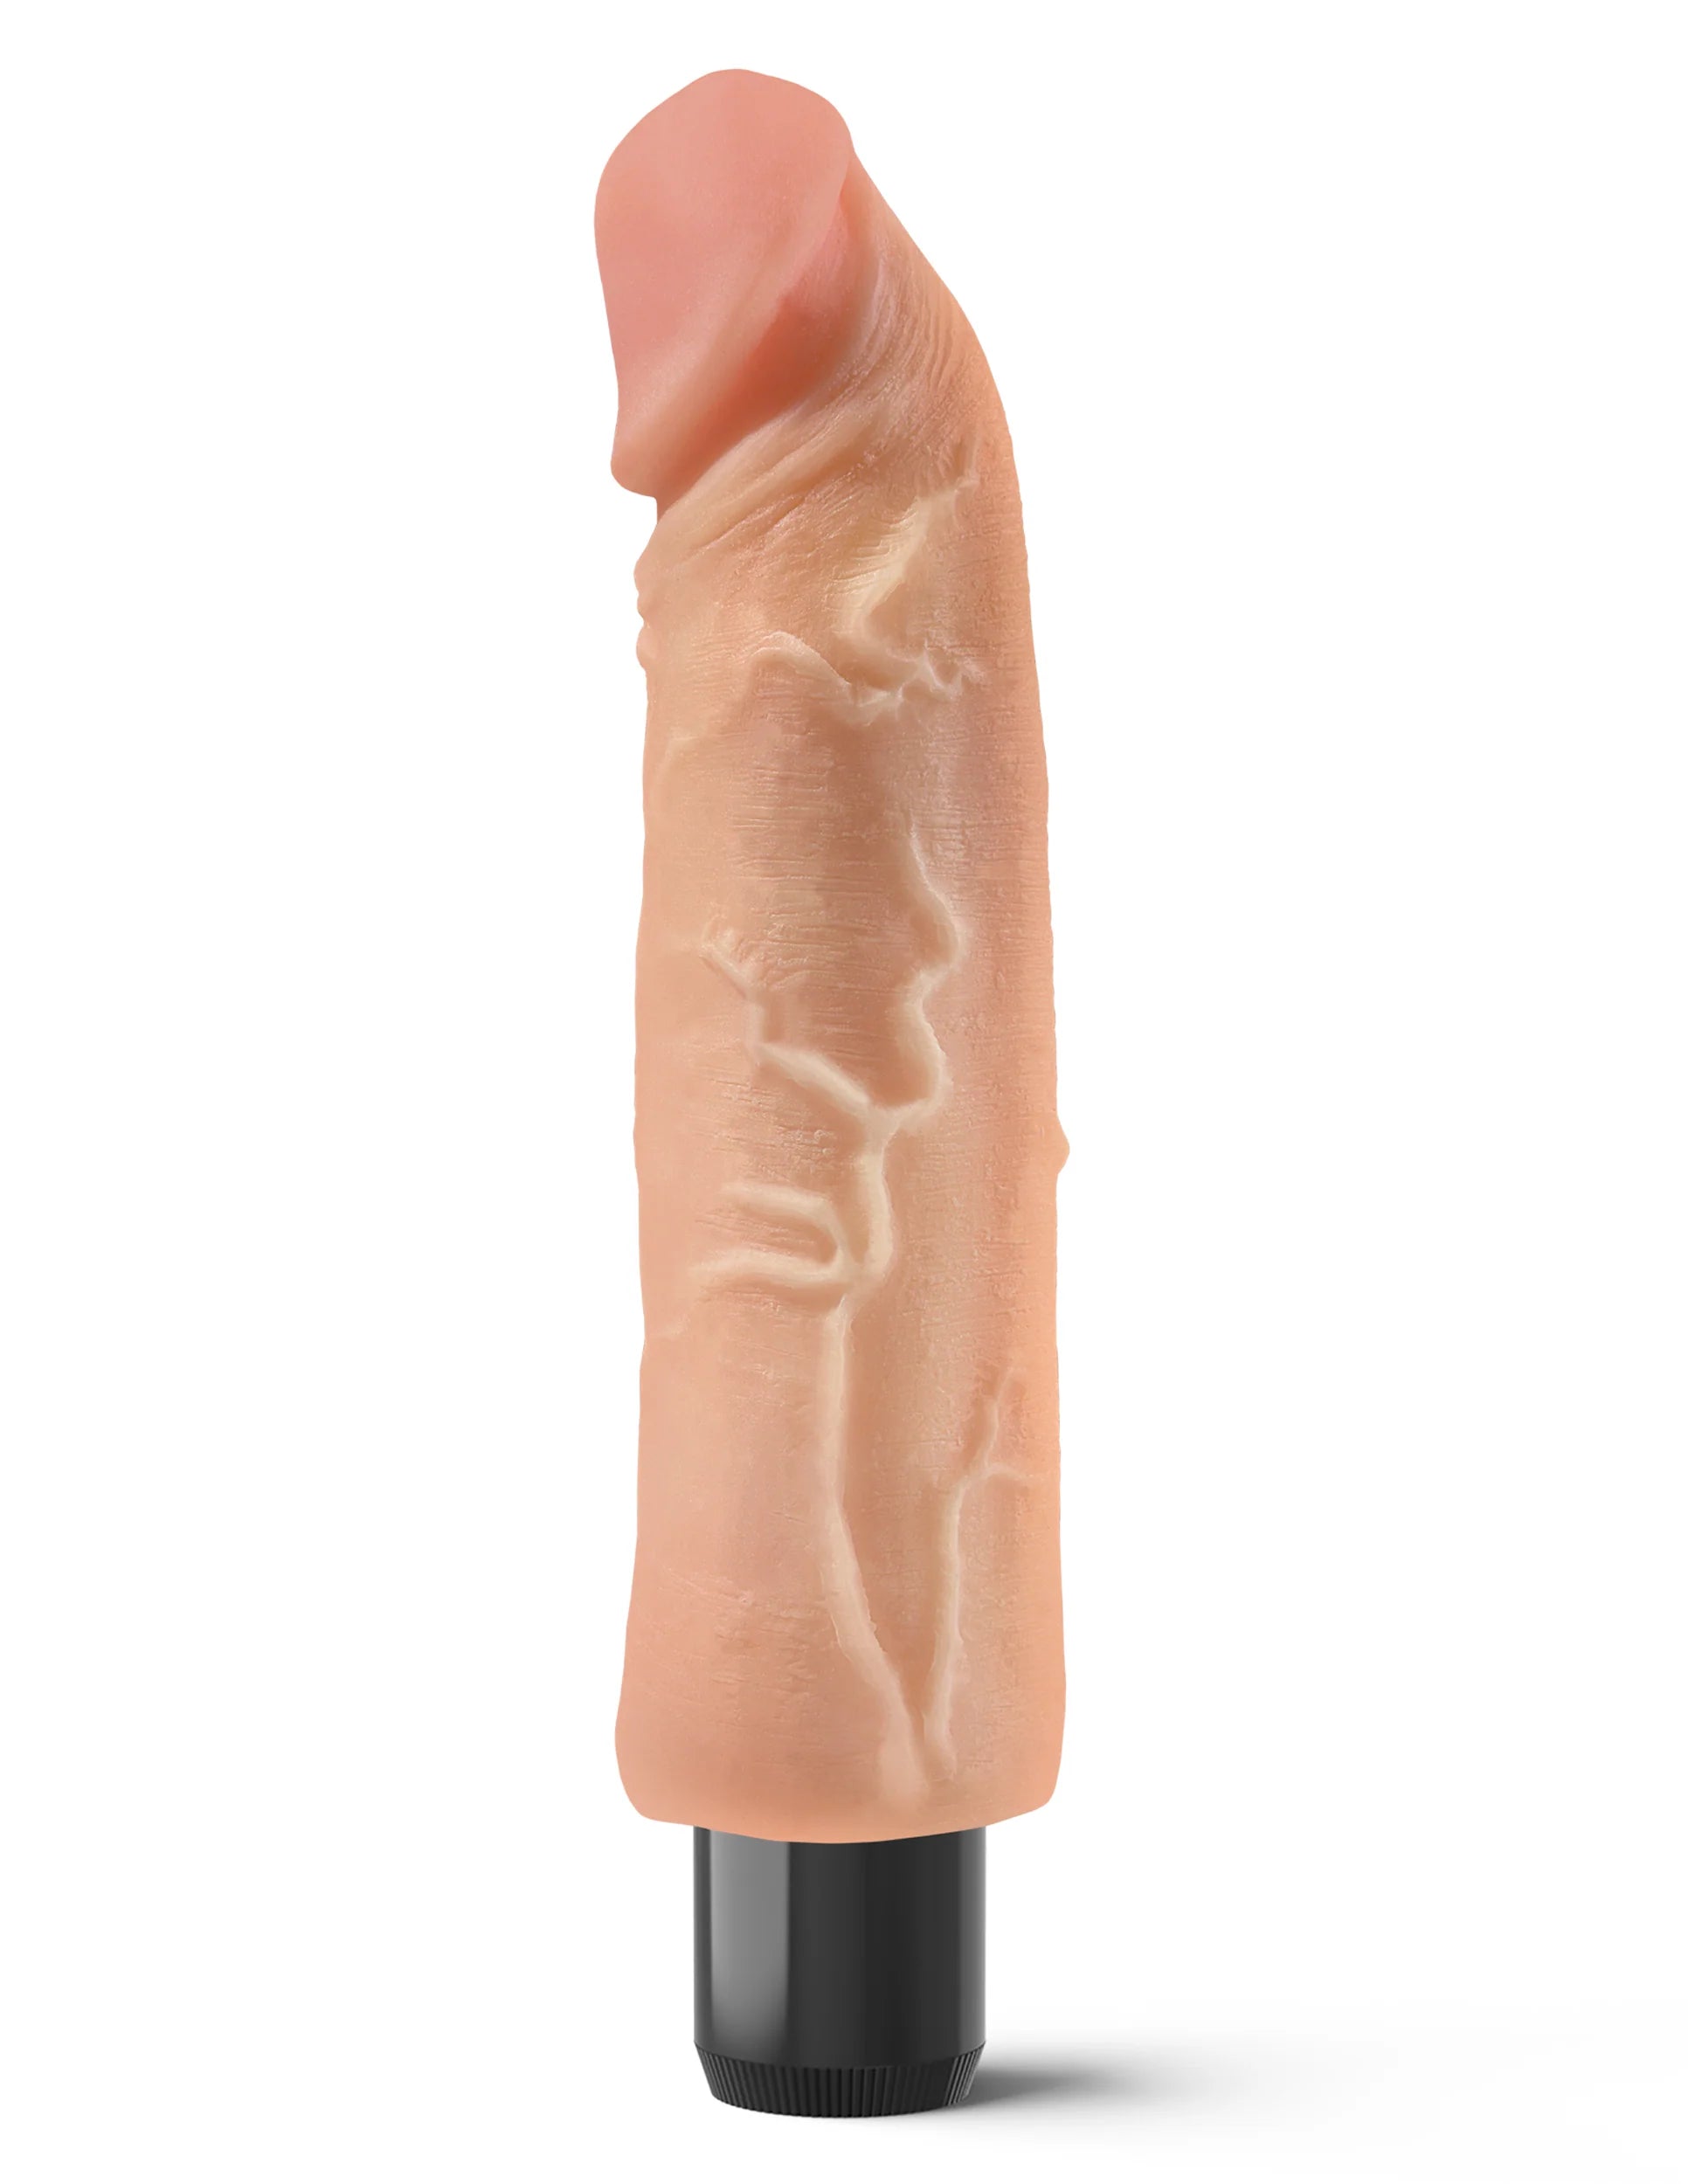 Pipedream Real Feel Lifelike Toyz No. 6 Realistic 8 in. Vibrating Dildo